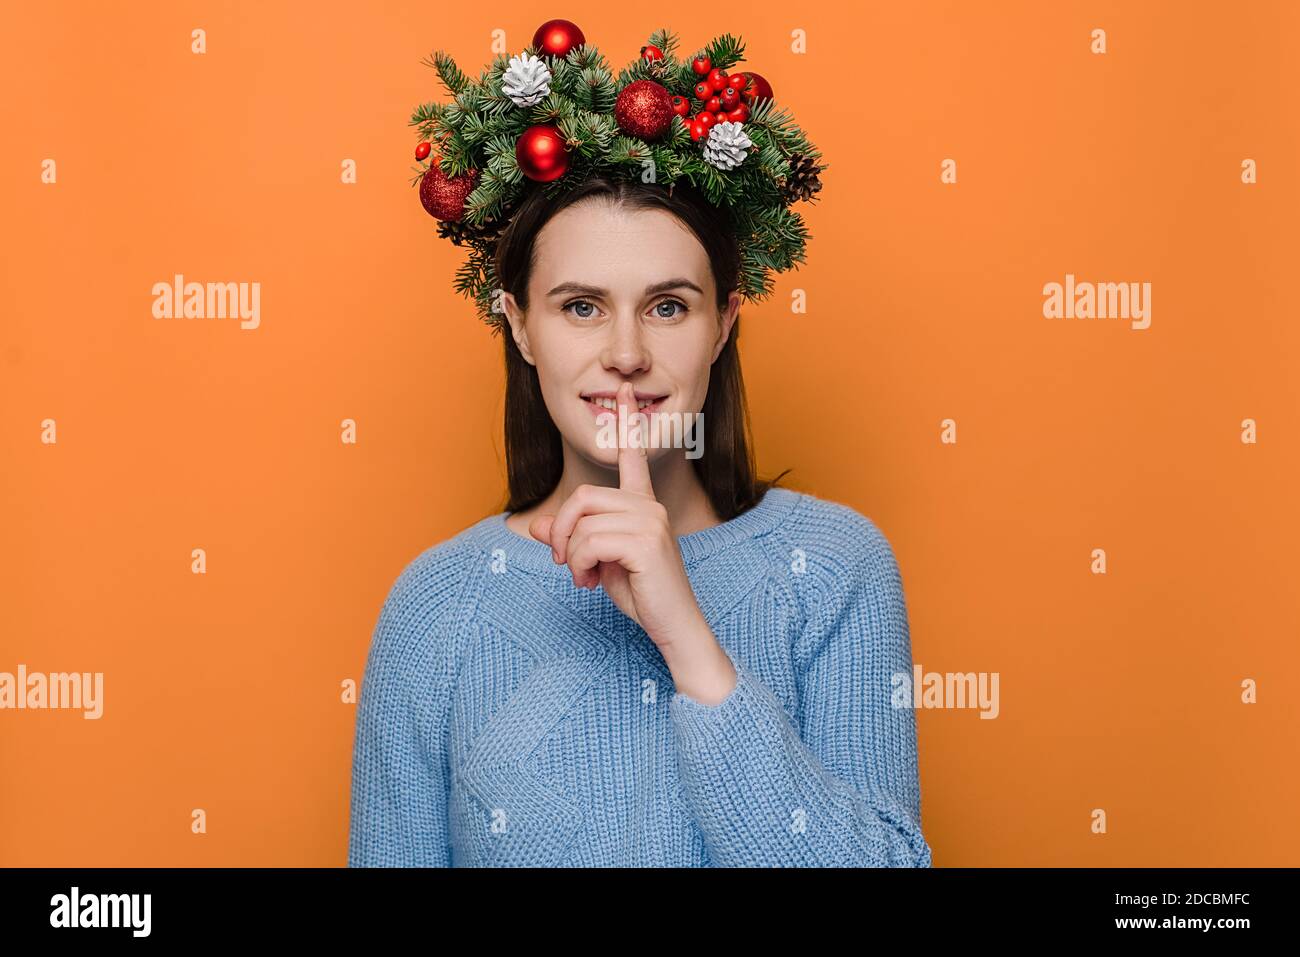 Positive female in handmade wreath, has toothy smile, makes hush gesture, wears winter sweater, poses against orange wall with copy space Stock Photo